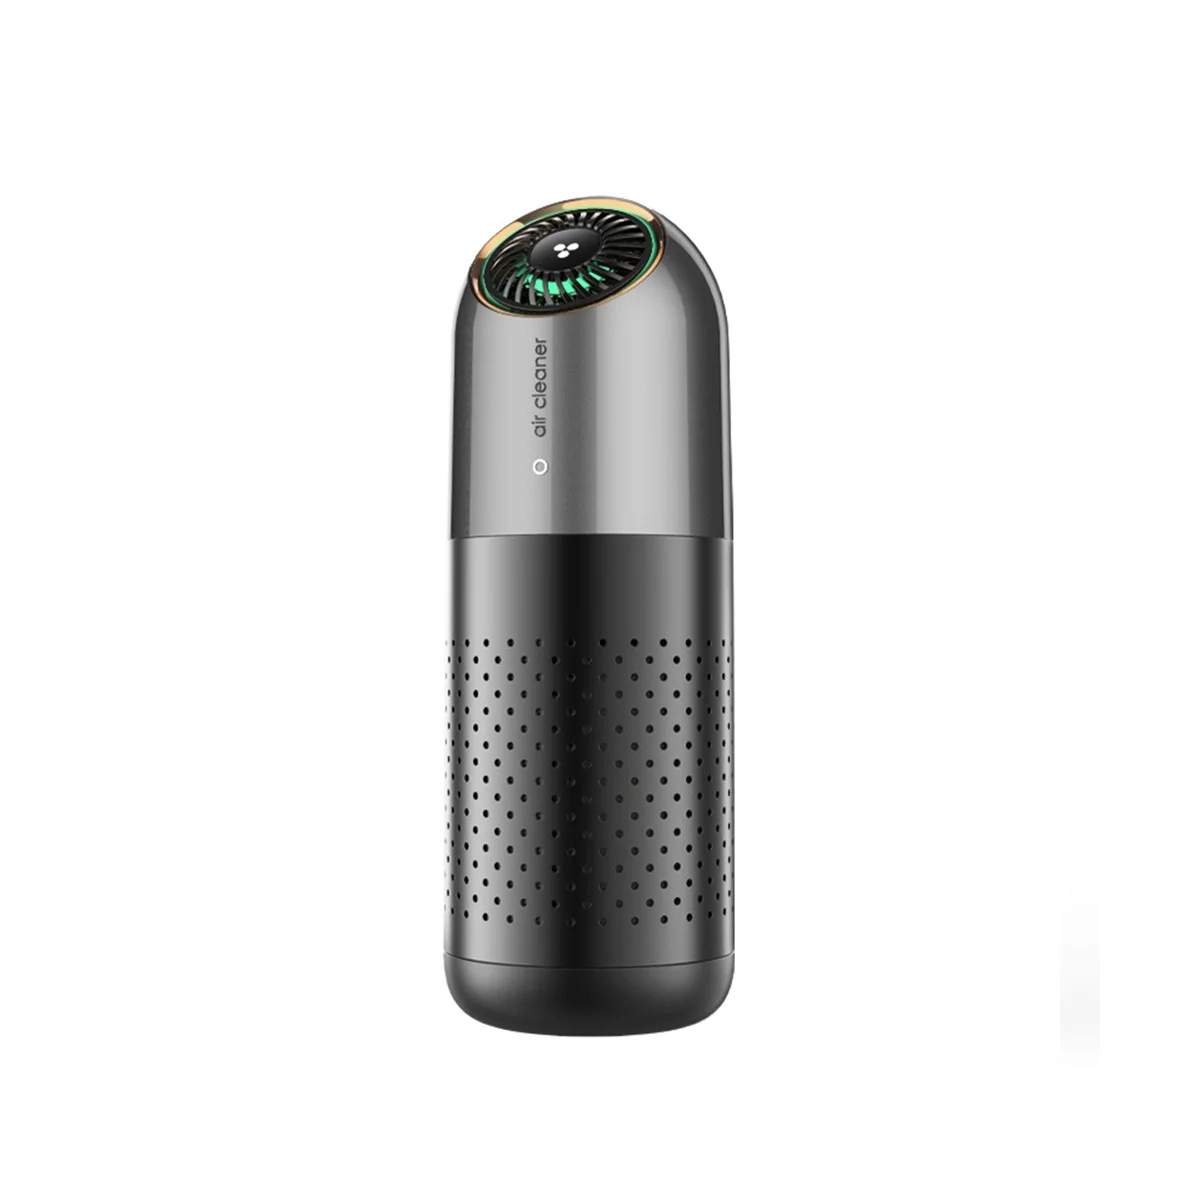 

Mini HEPA Air Purifier with Filtration Air Cleaner for Car & Office, Eliminates Smoke, Dust,Pet Dander, Low Noise Black